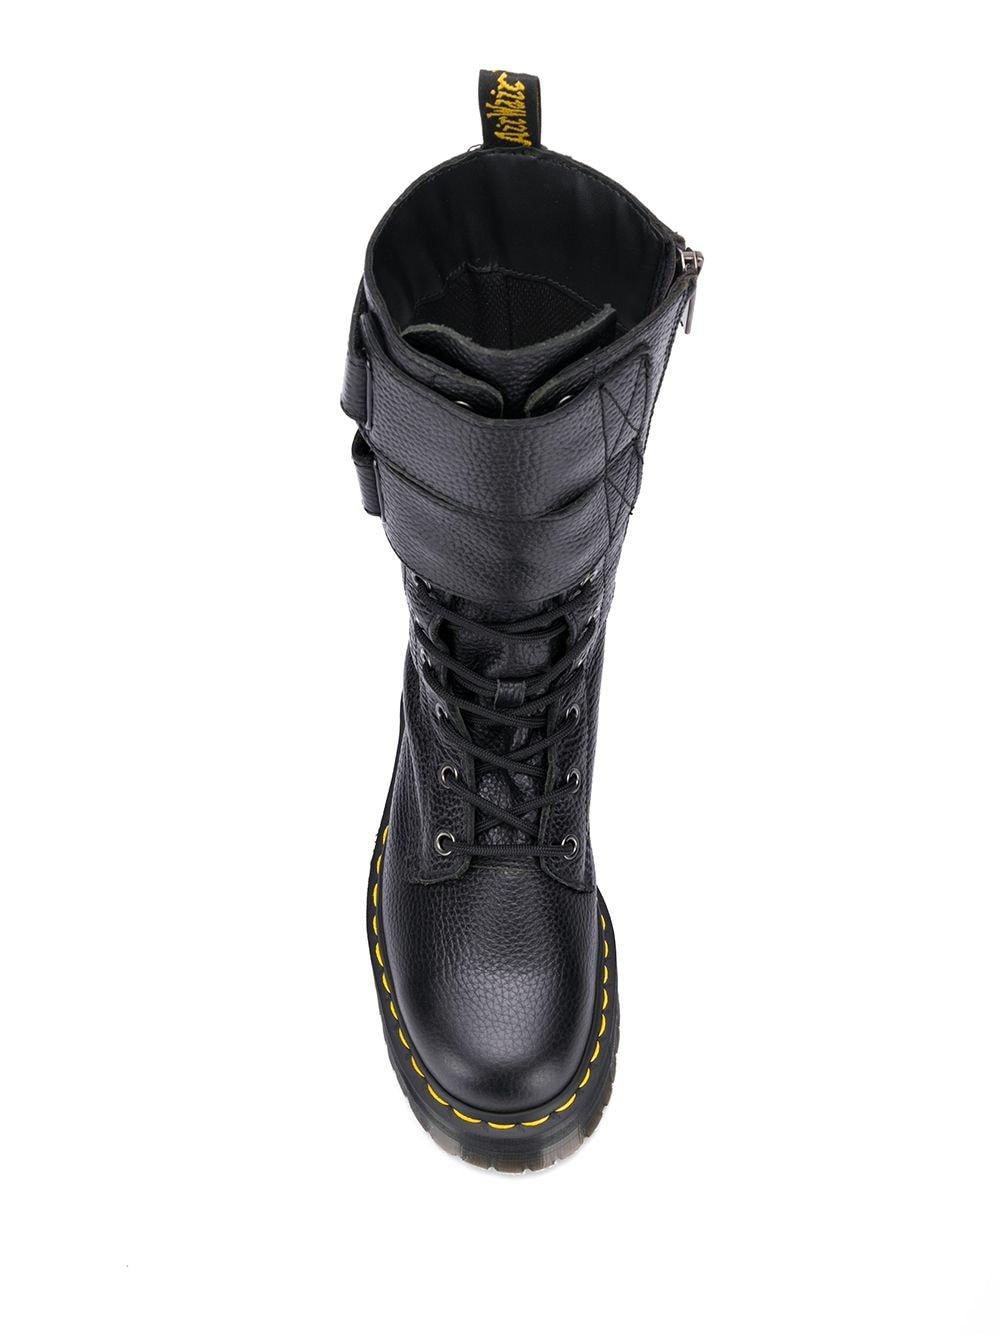 Dr. Martens Leather Jagger 10 Eye Boots in Black - Lyst